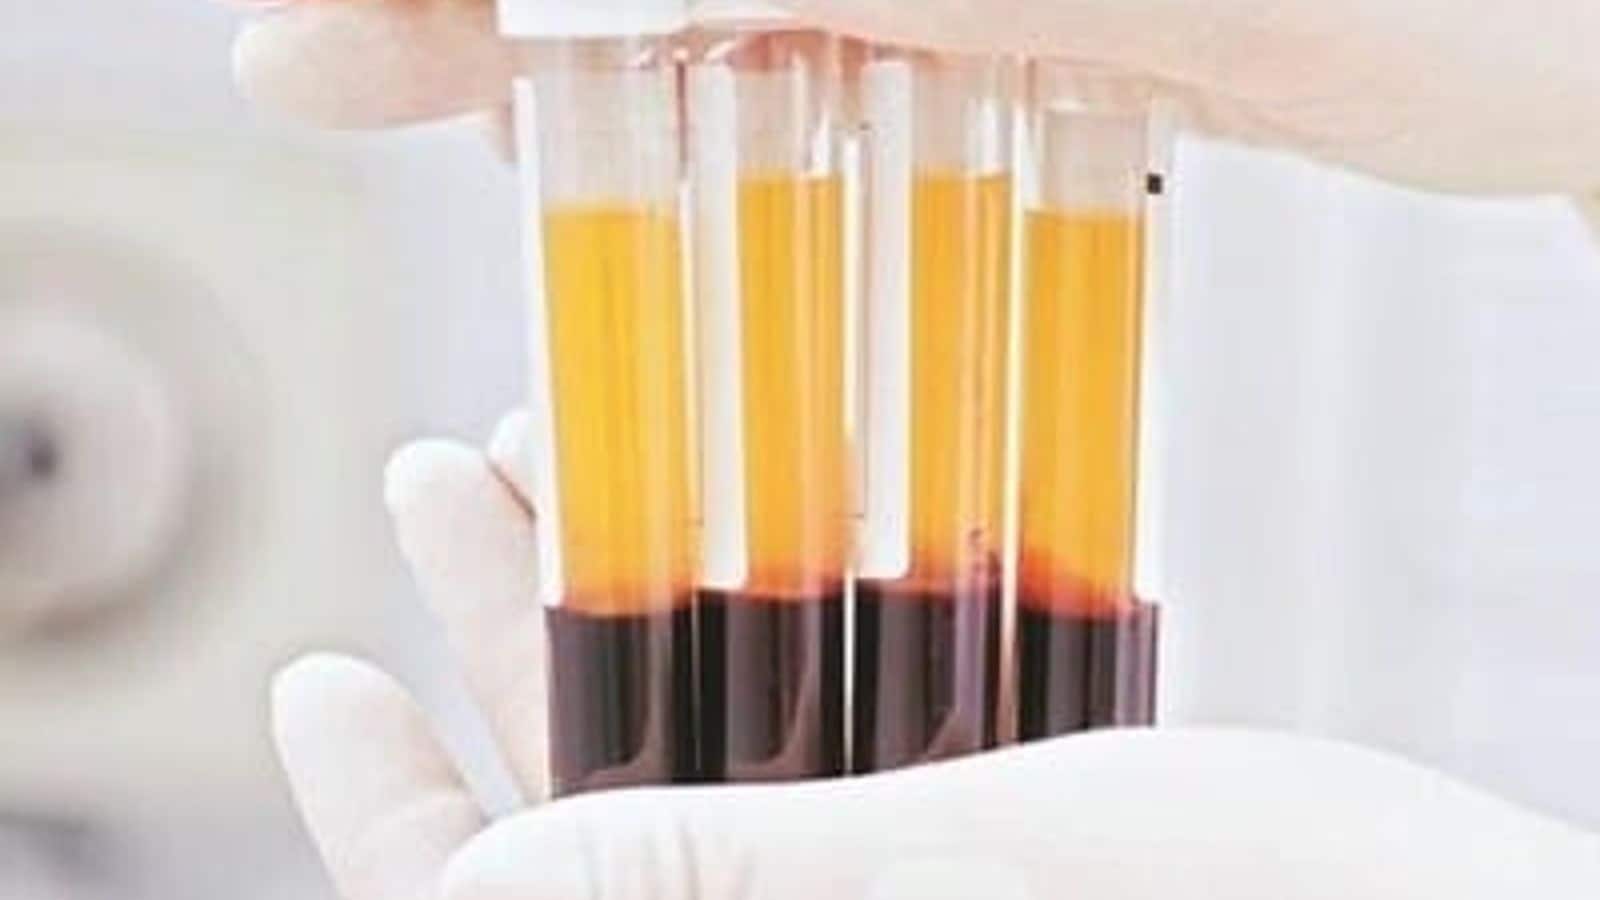 Final report on UK's infected blood scandal will release tomorrow